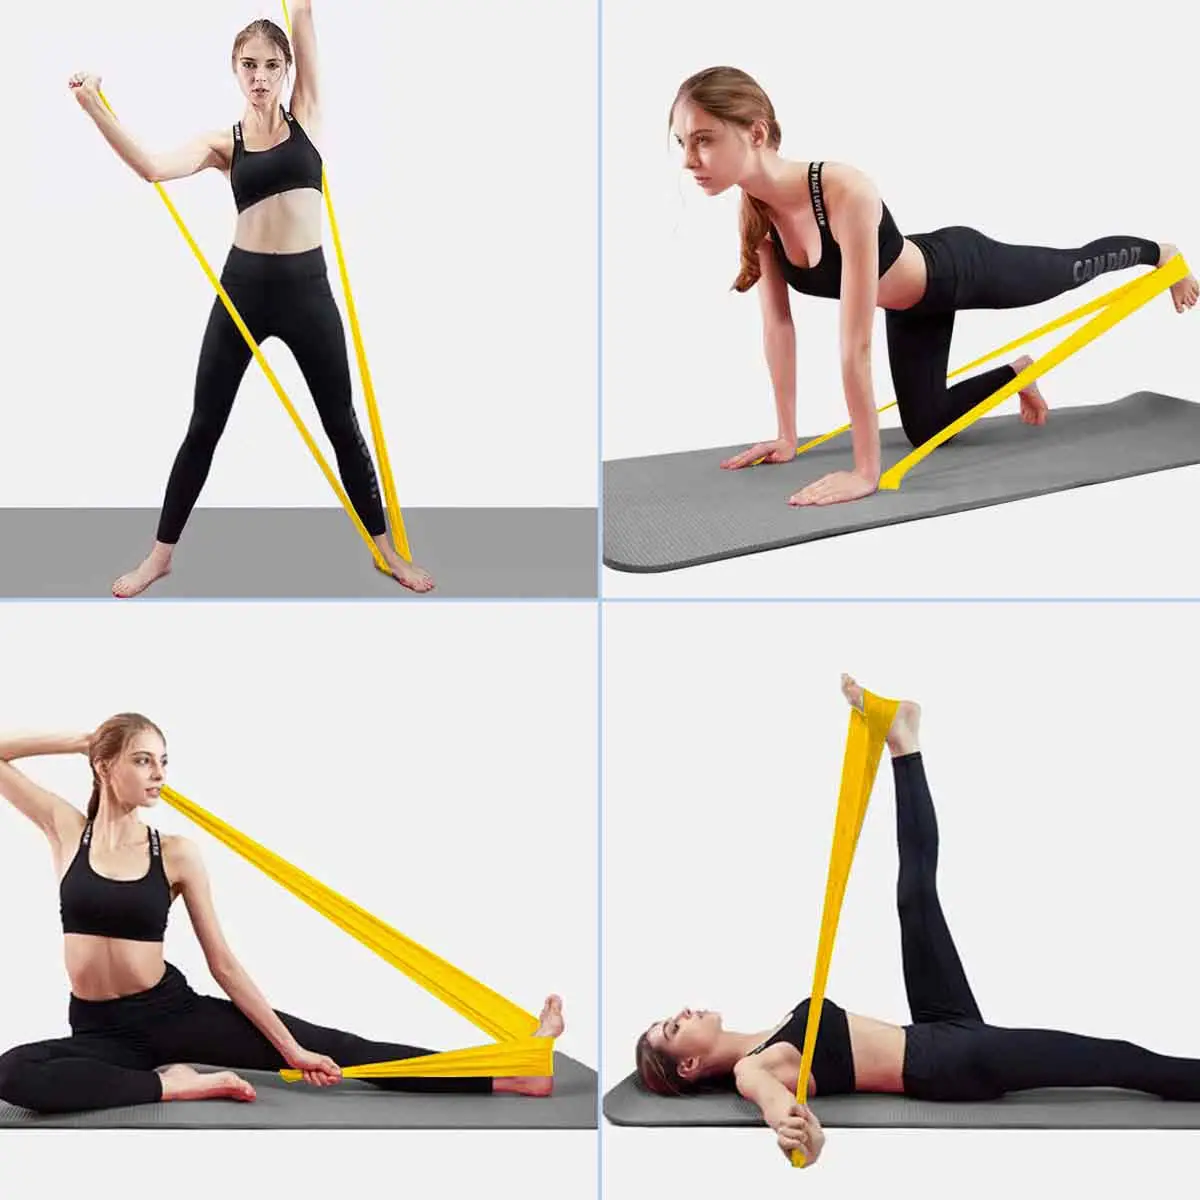 6 Standing Resistance Band Exercises for Lower Back Pain 